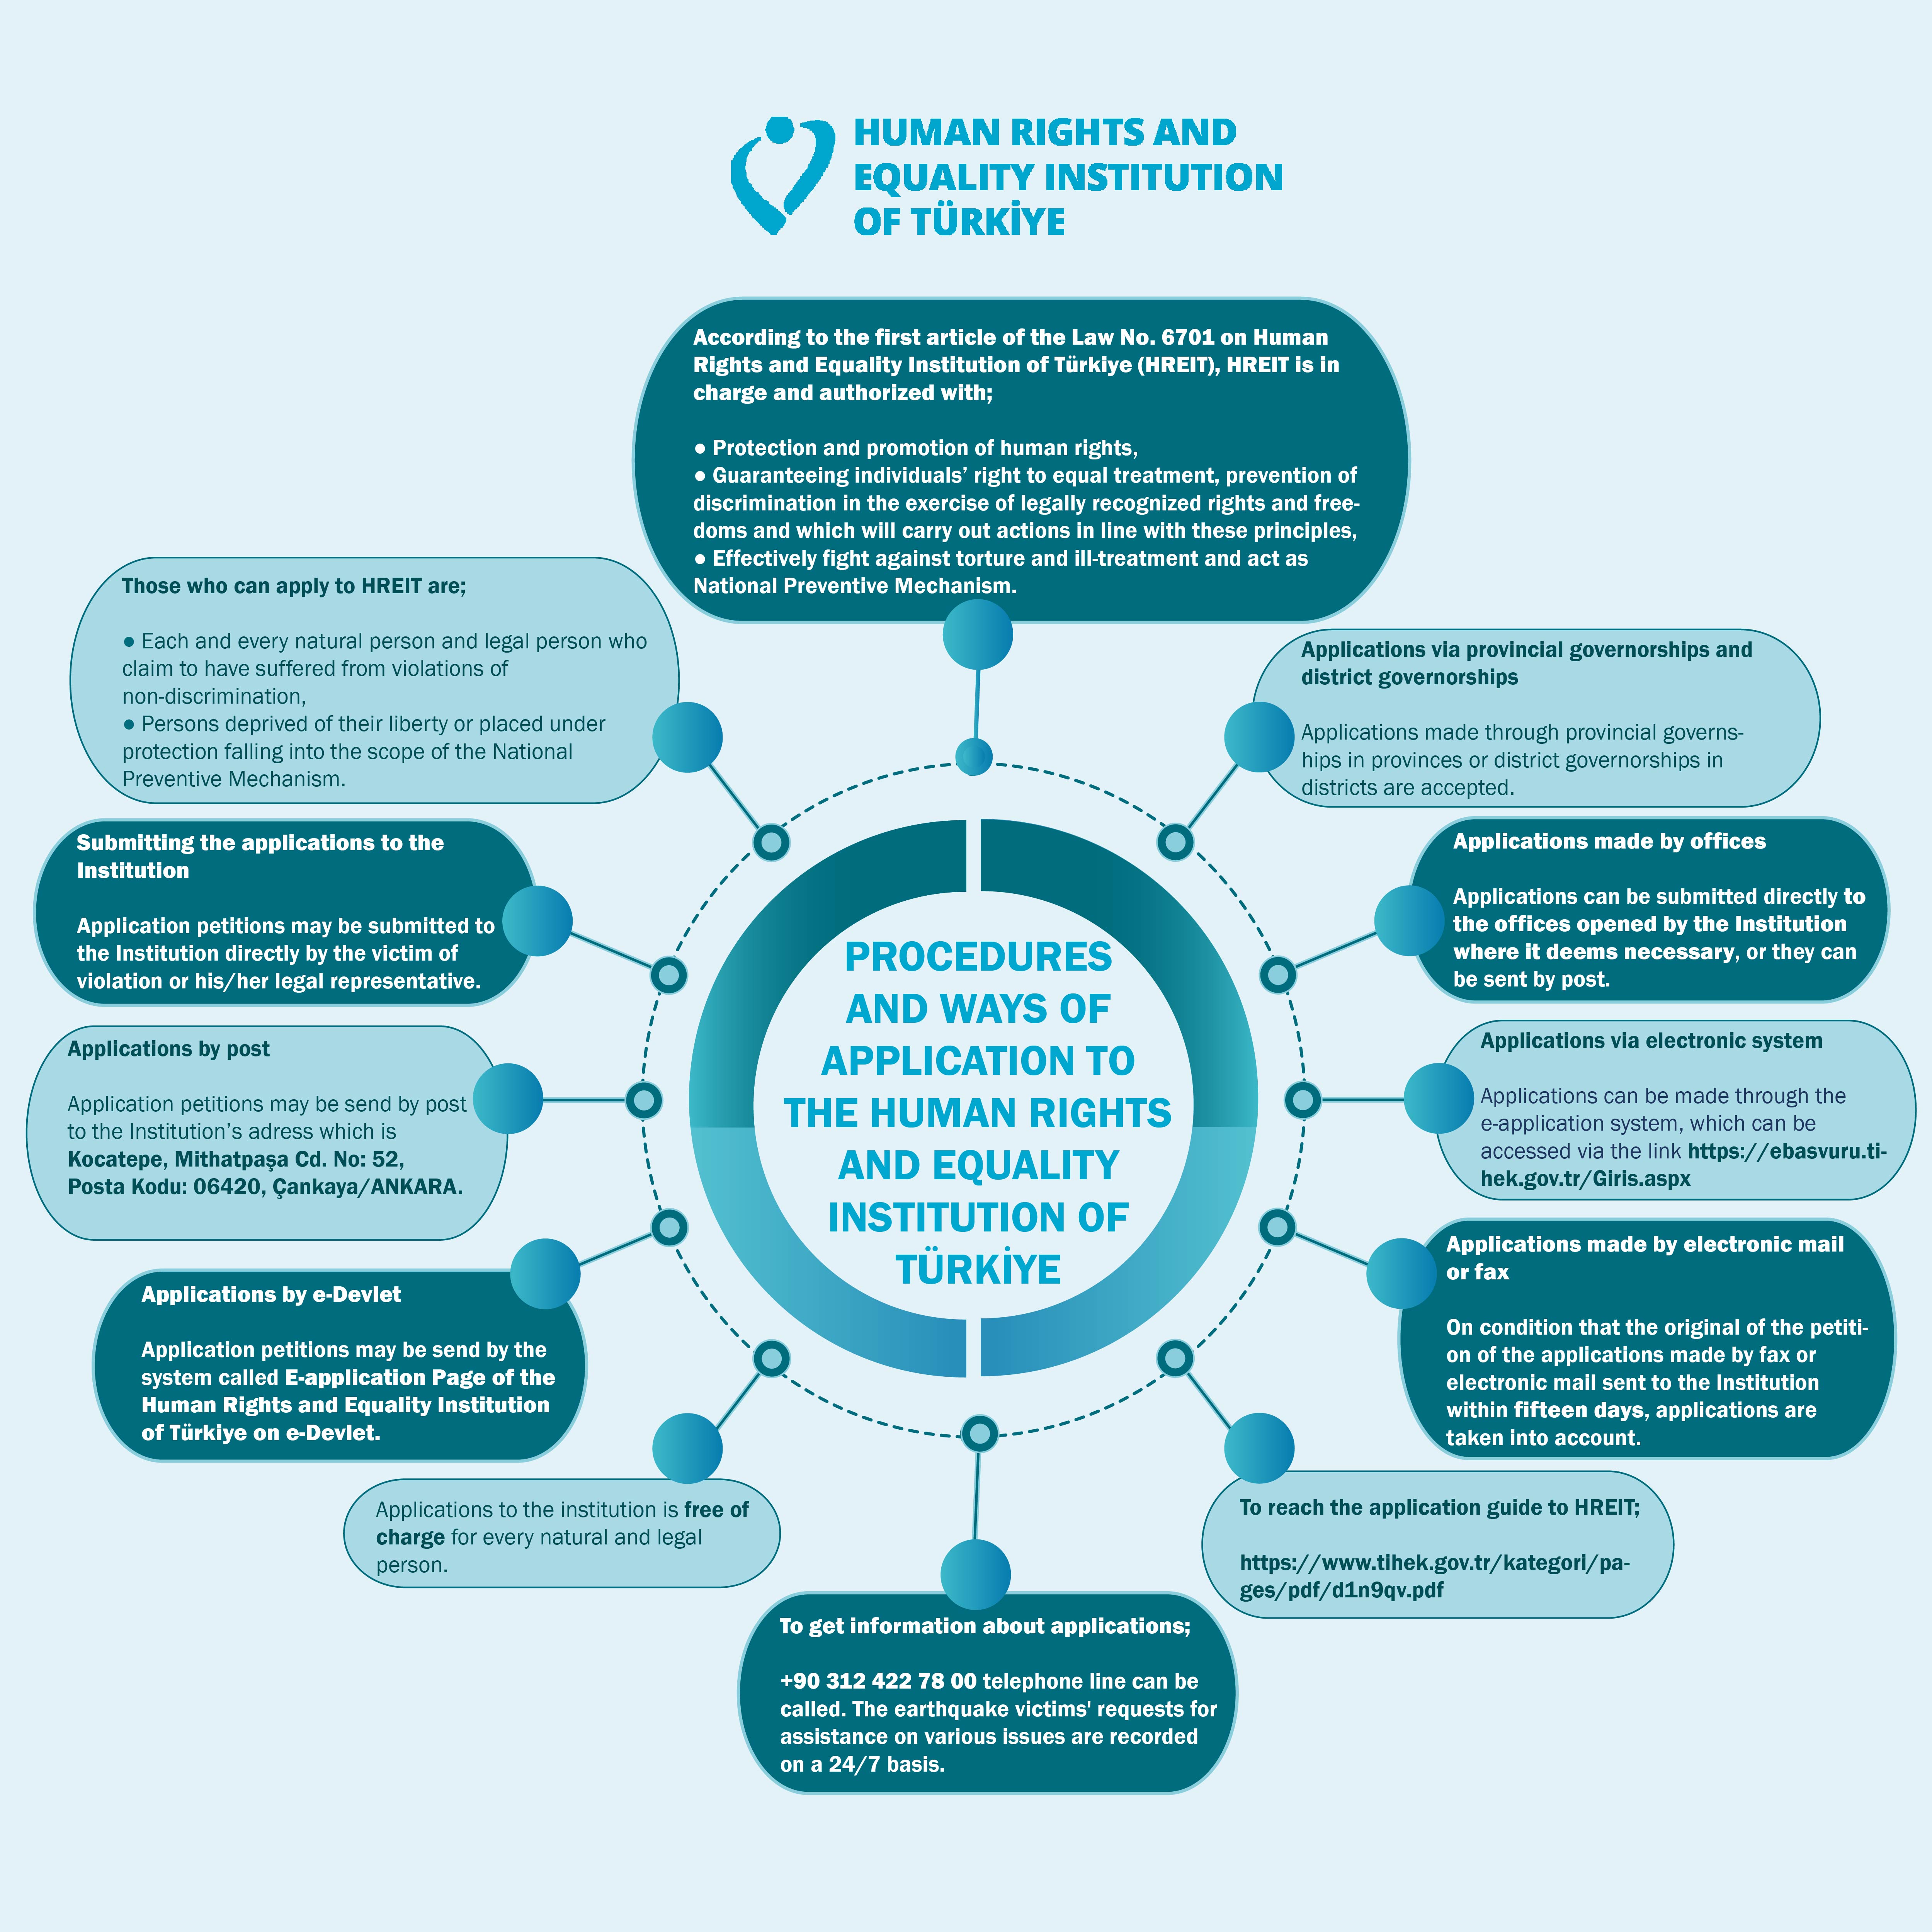 Infographic on Application Procedures and Ways to the Human Rights and Equality Institution of Türkiye